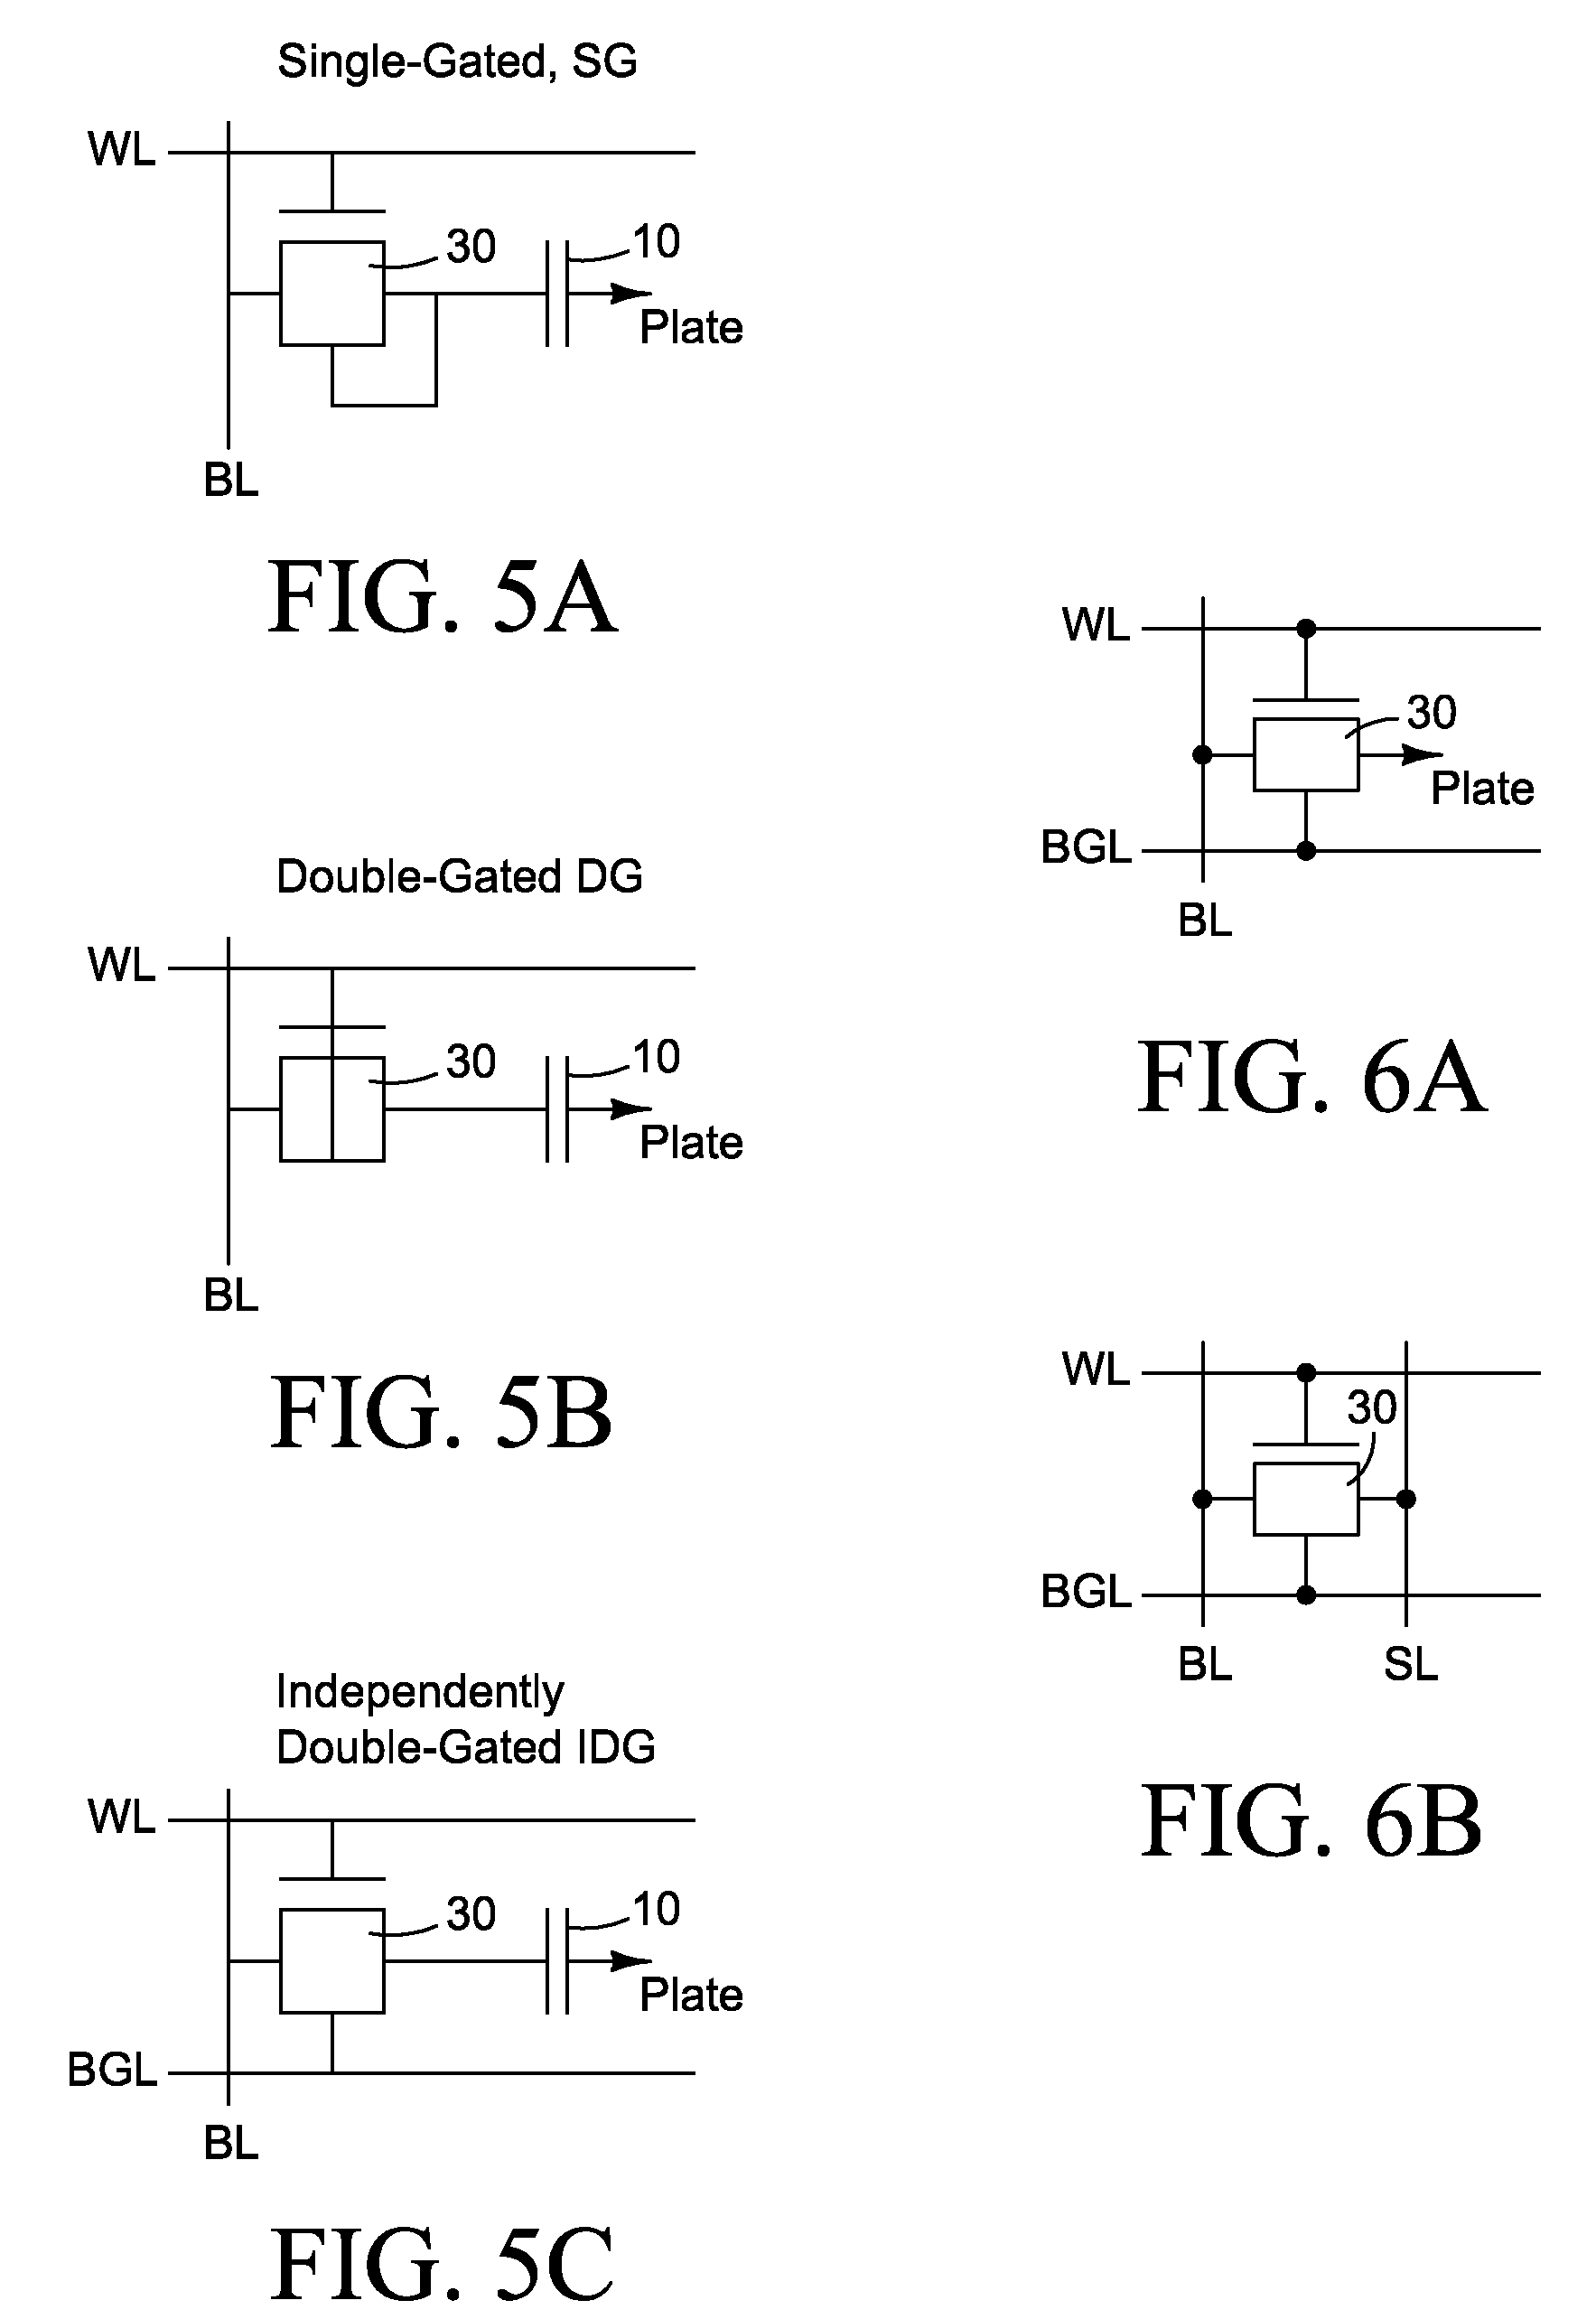 Independently-double-gated transistor memory (IDGM)